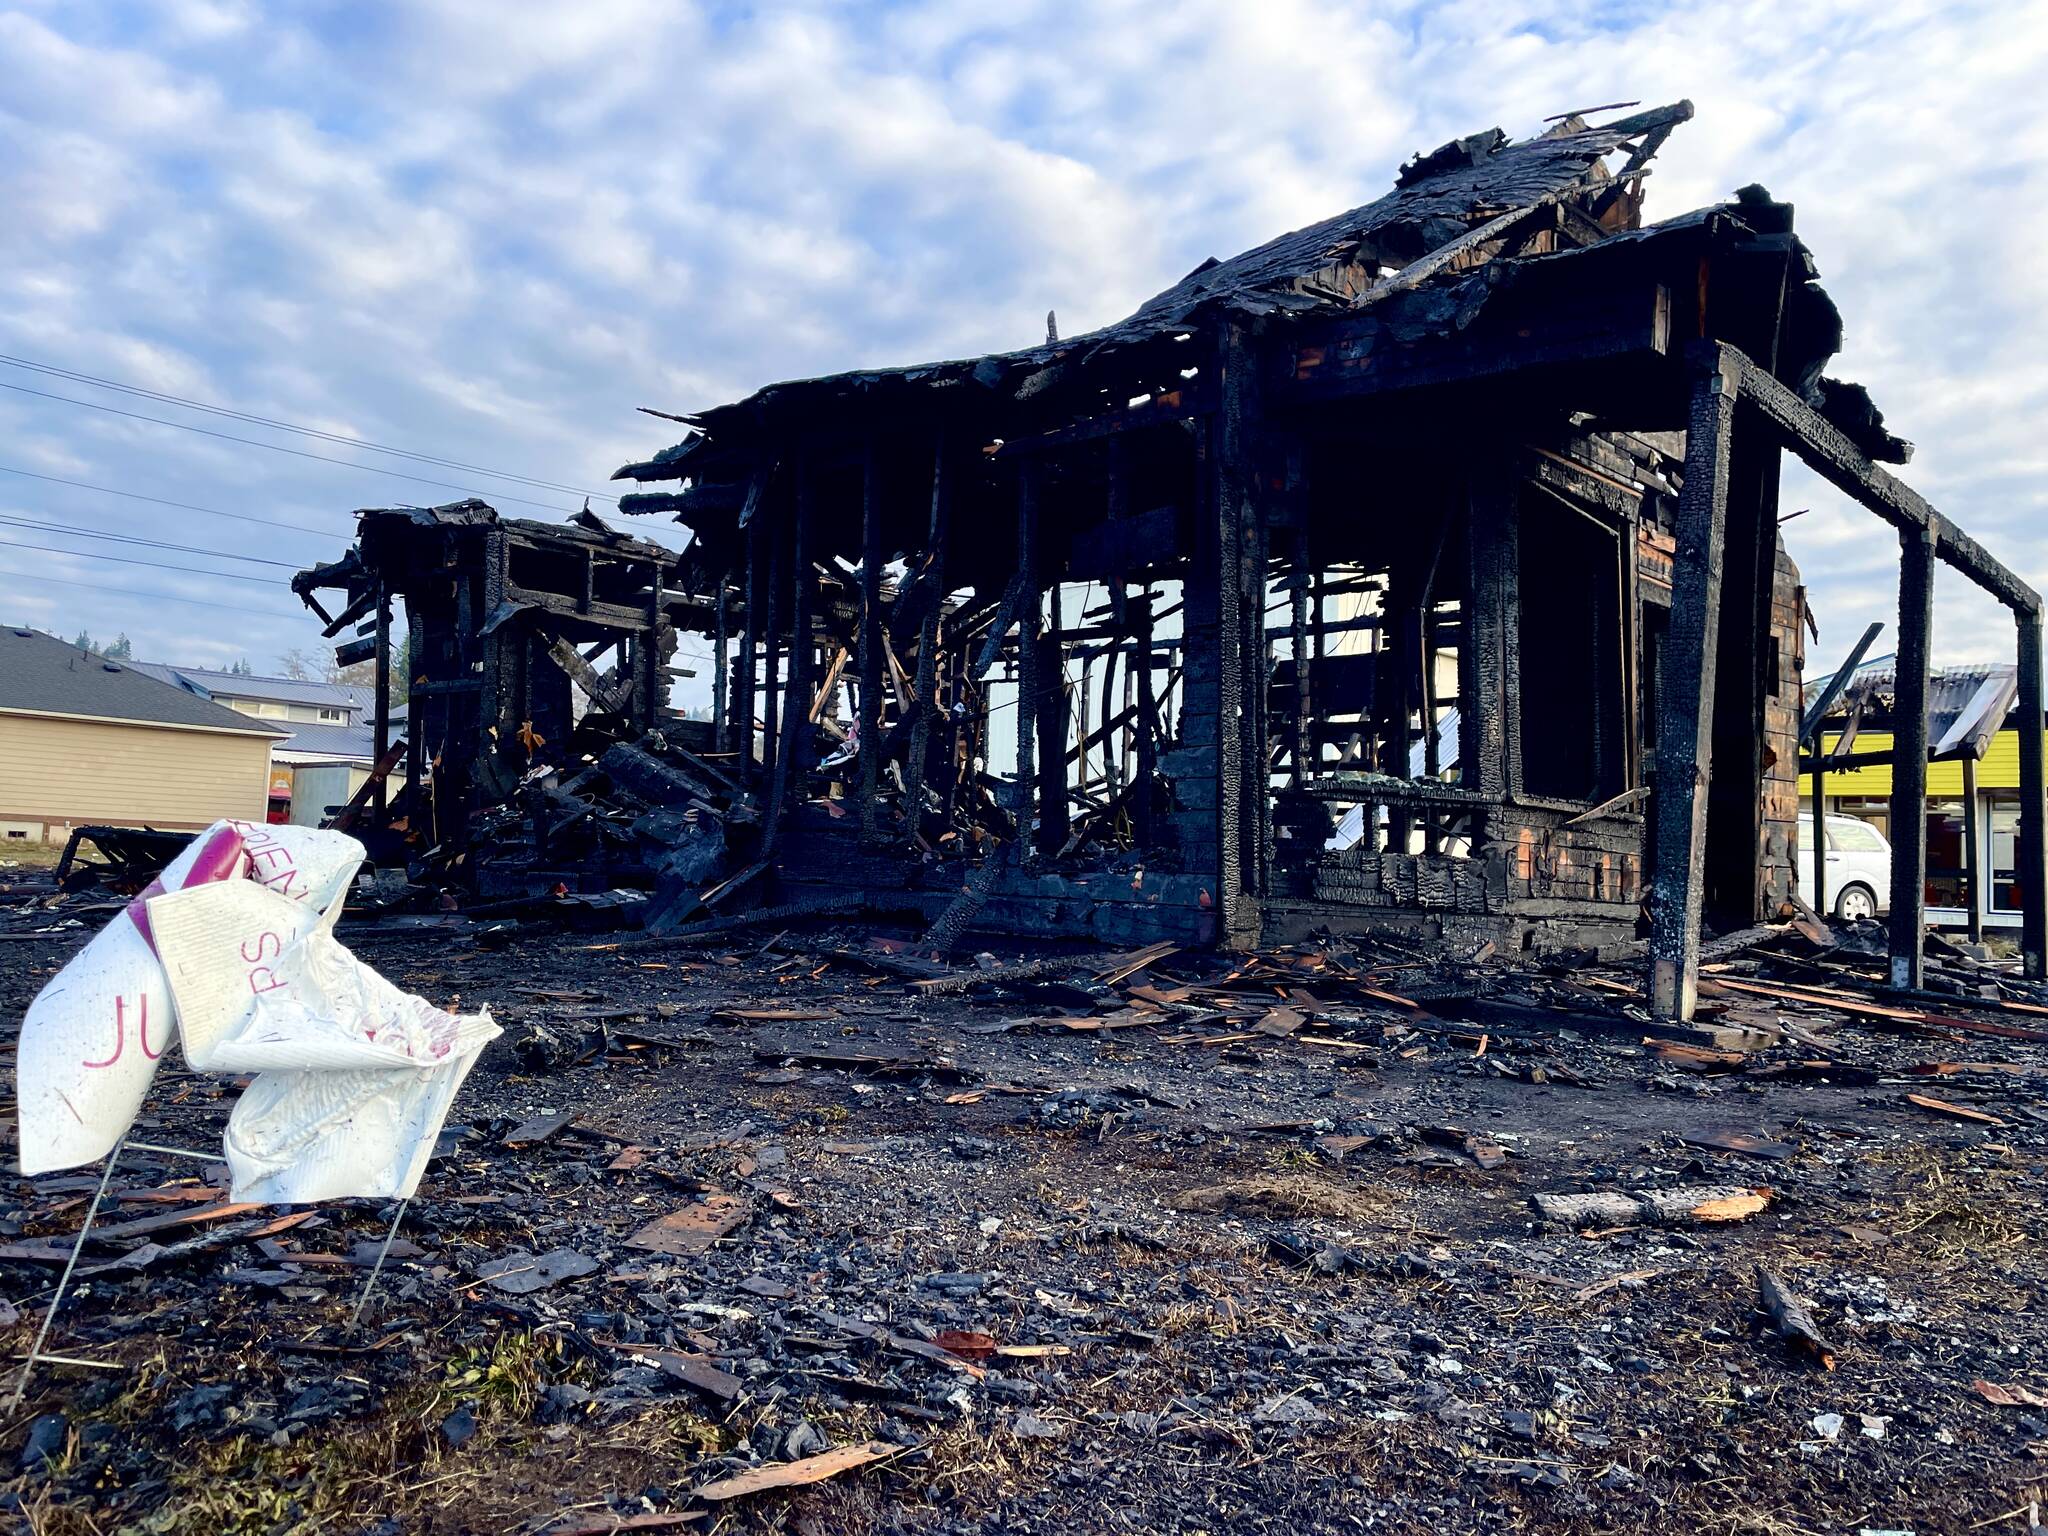 A vacant Aberdeen residence was completely gutted by a fire early on the morning of Nov. 21. (Micheal S. Lockett / The Daily World)